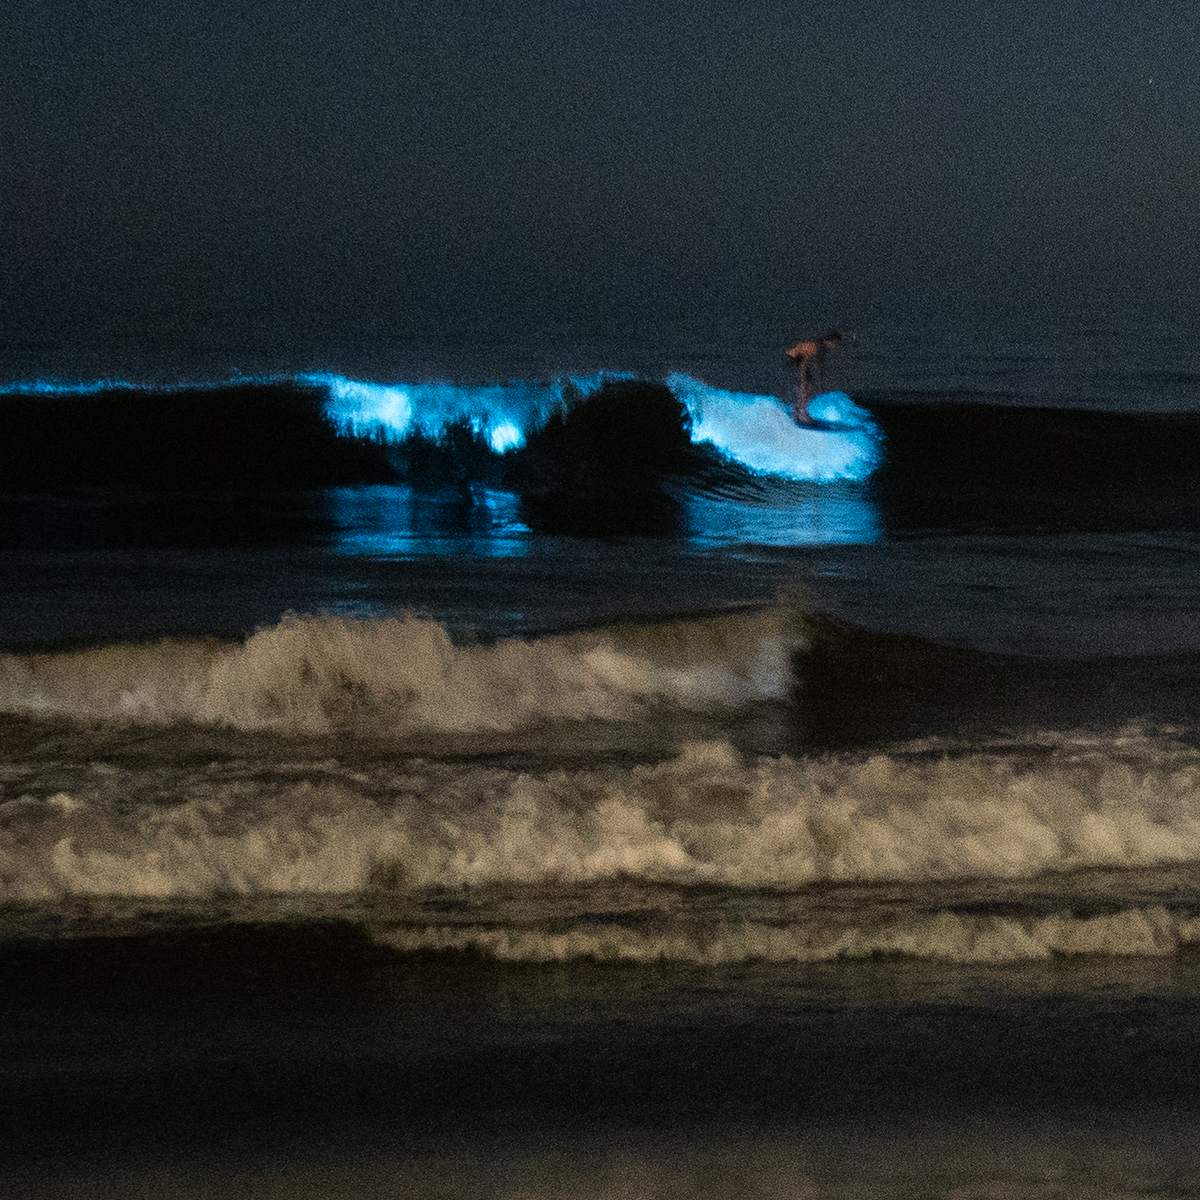 What's causing California's ocean waves to glow?